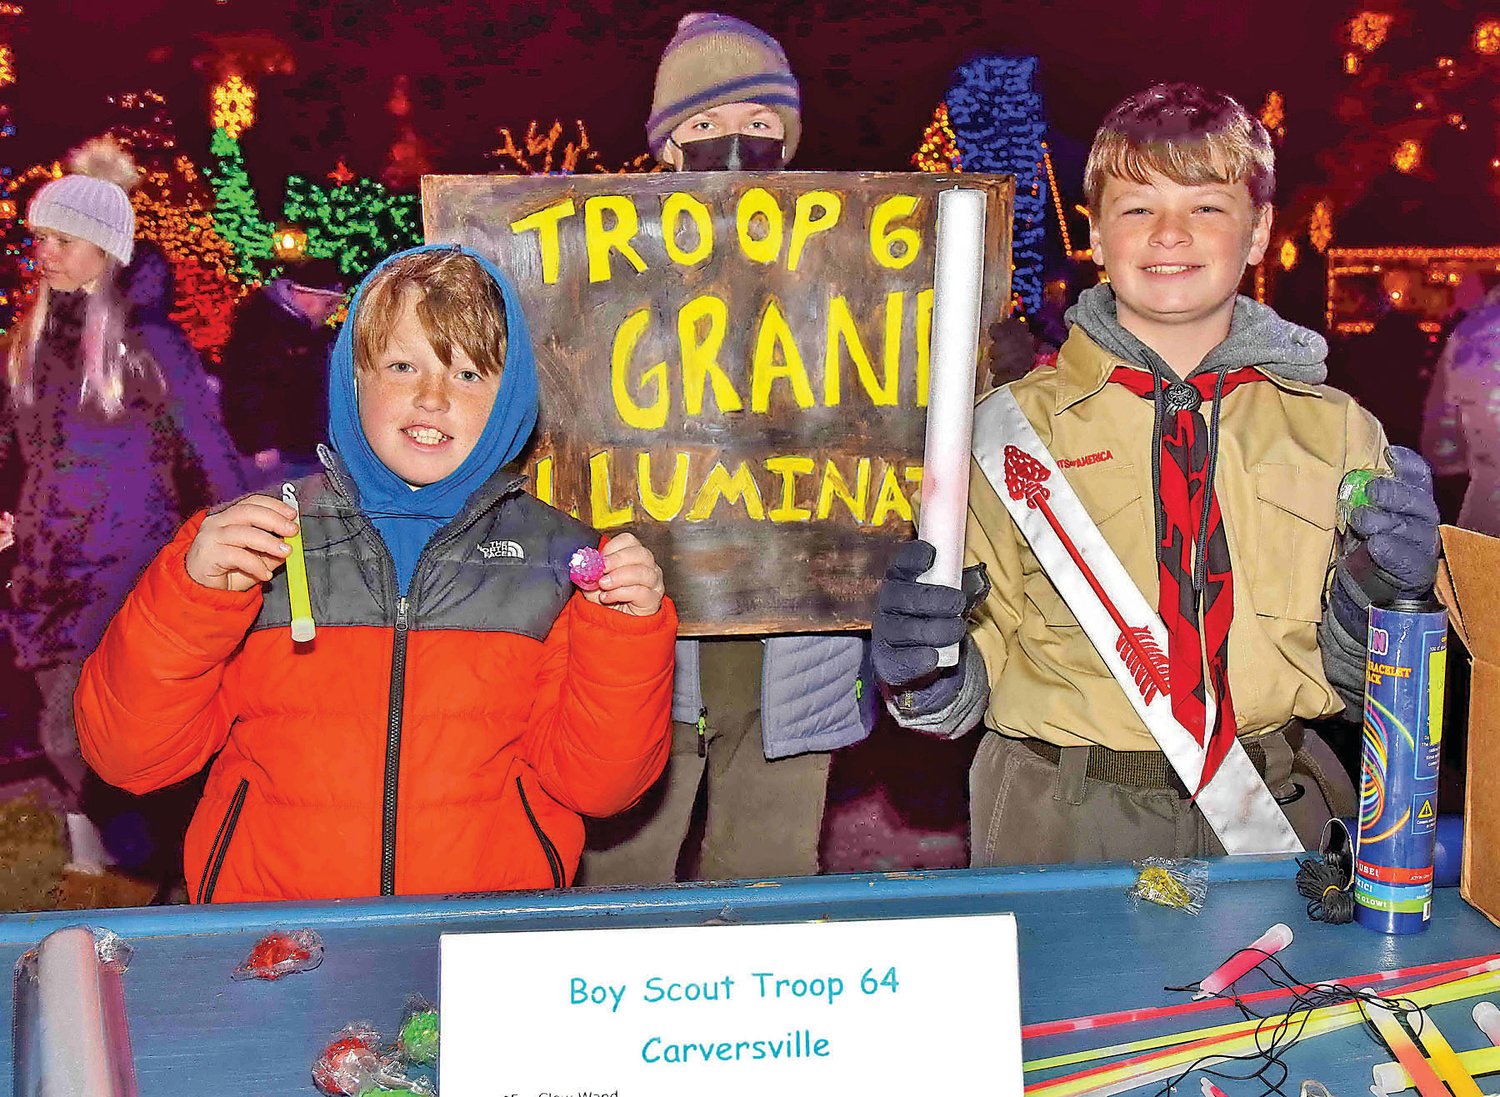 Boy Scouts from Troop 64, Carversville, provided light sticks.